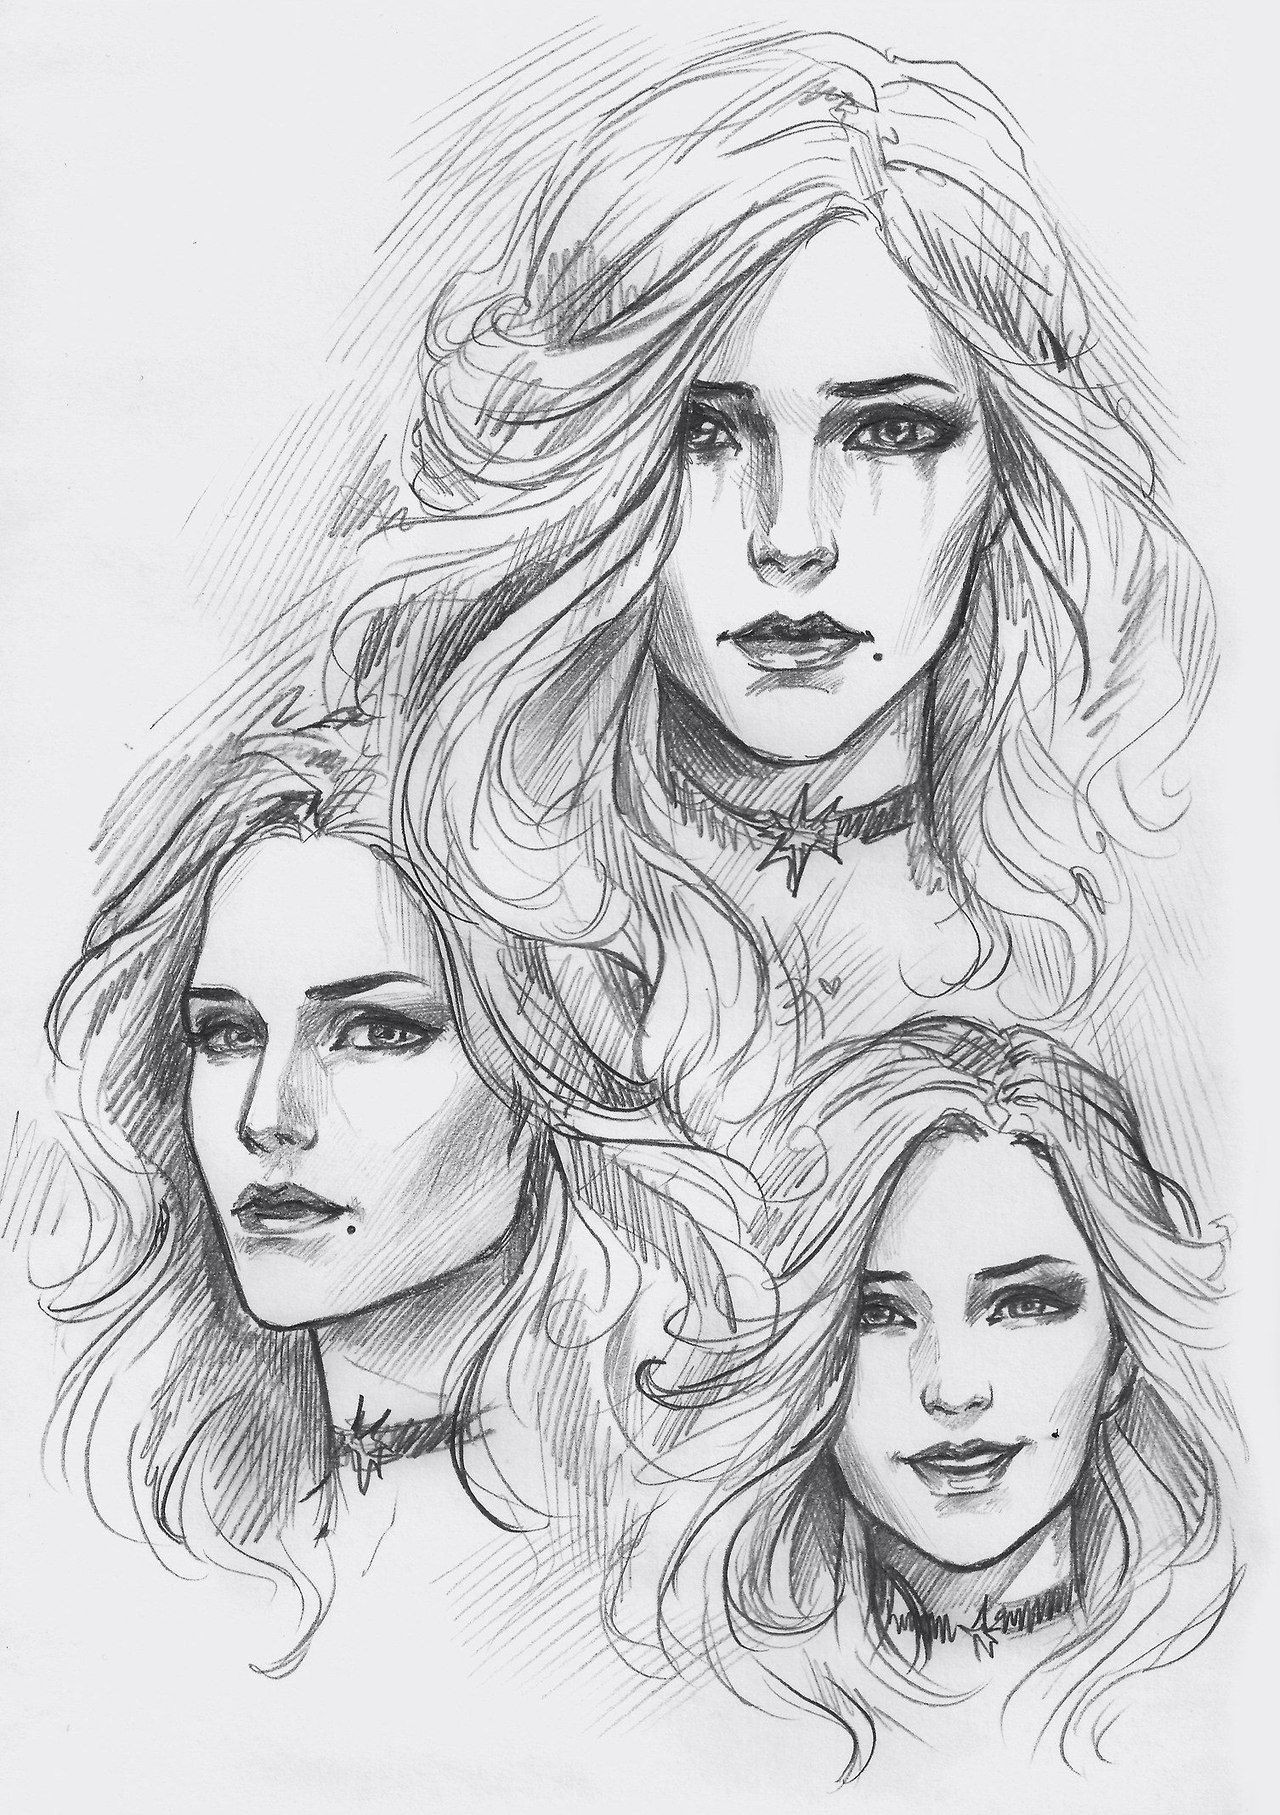 Witcher 3 Girl Drawing Pin by Jesse On Witcher A Self Yennefer Of Vengerberg Drawings